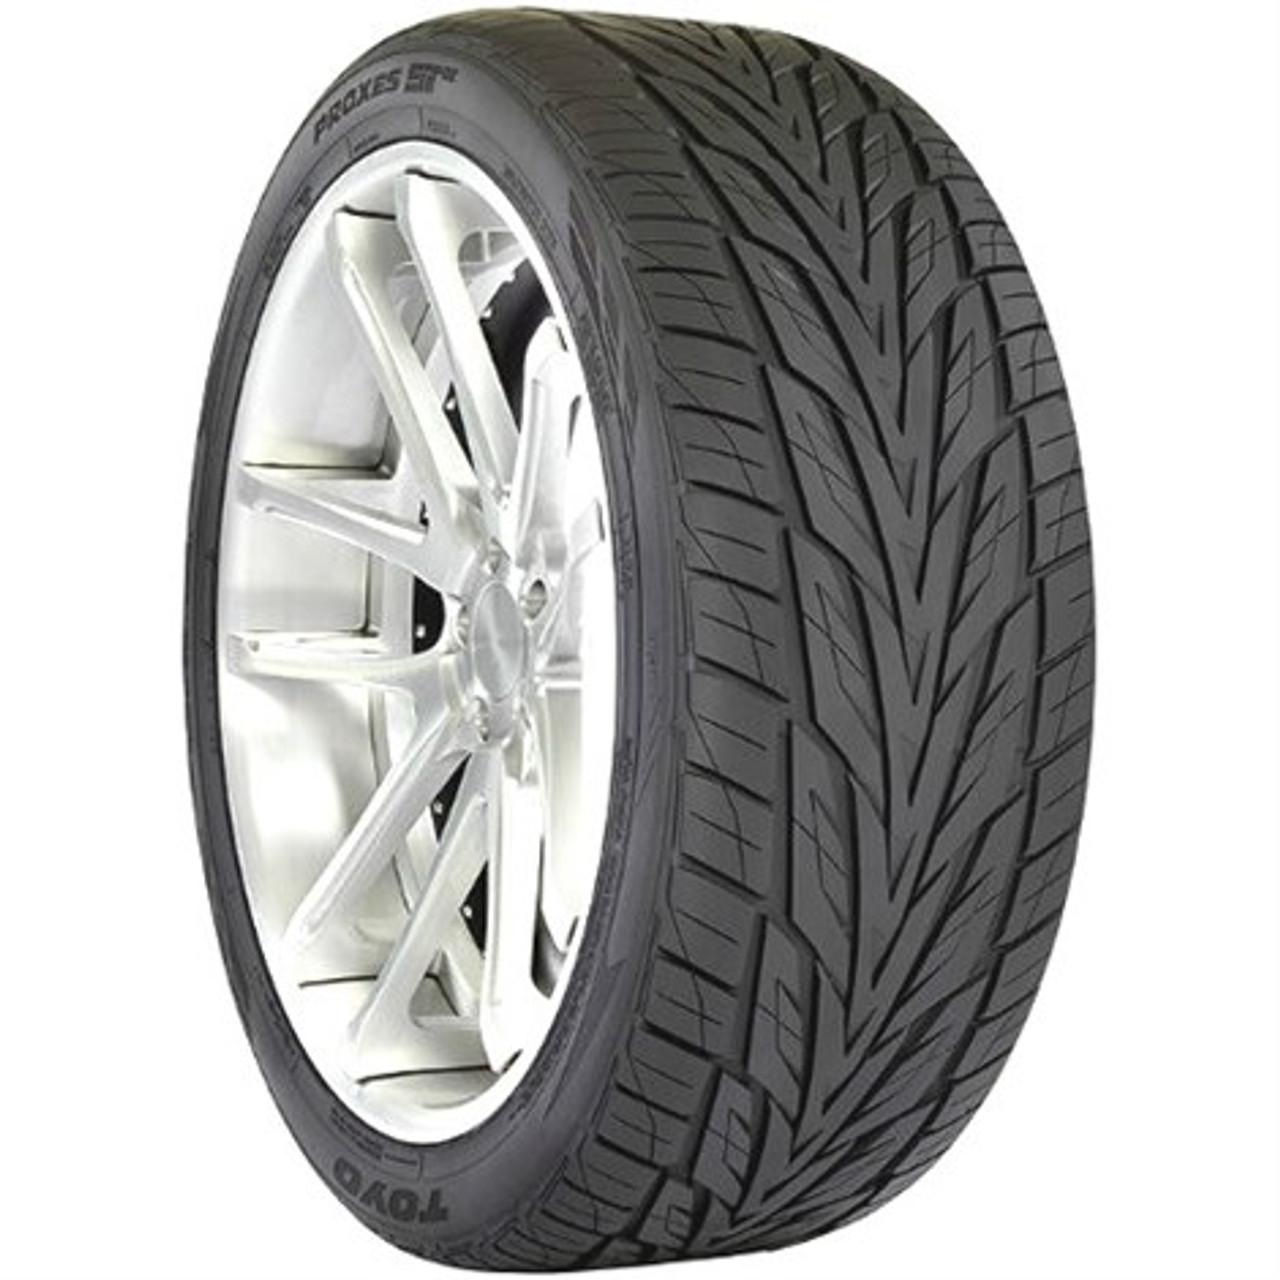 Toyo Proxes ST III Tire - 255/60R17